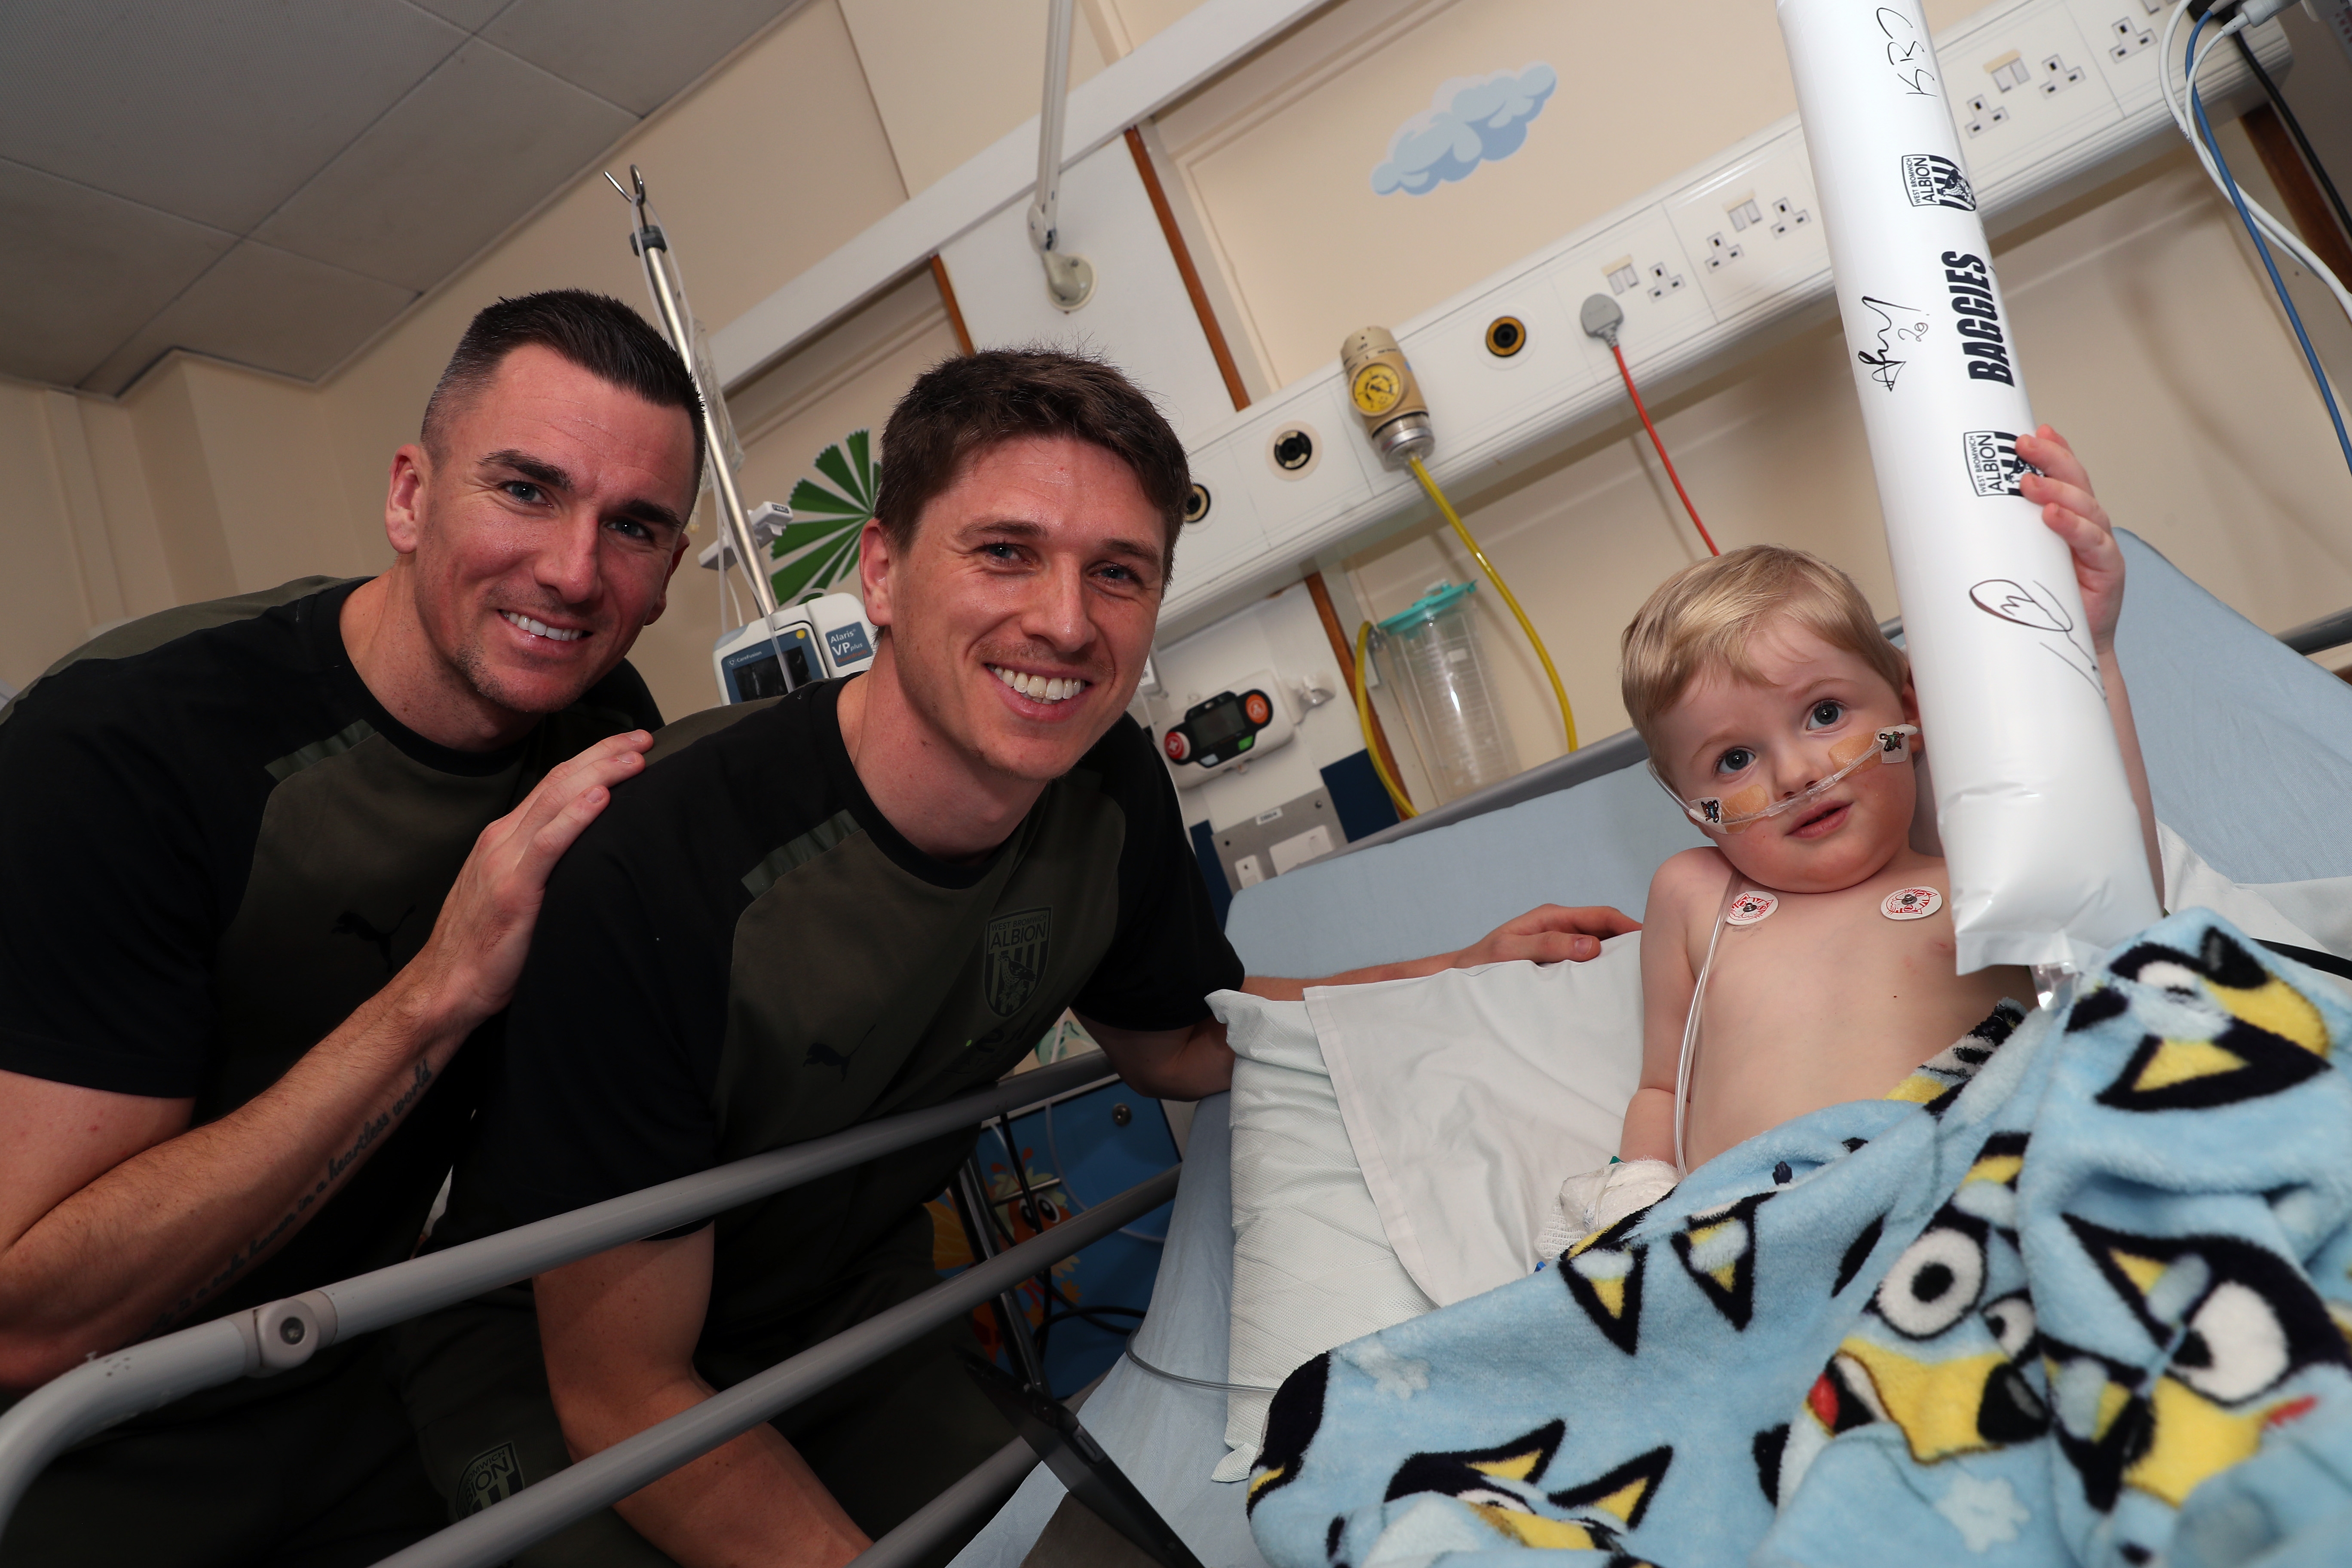 Jed Wallace and Adam Reach meet a young patient at Sandwell General Hospital